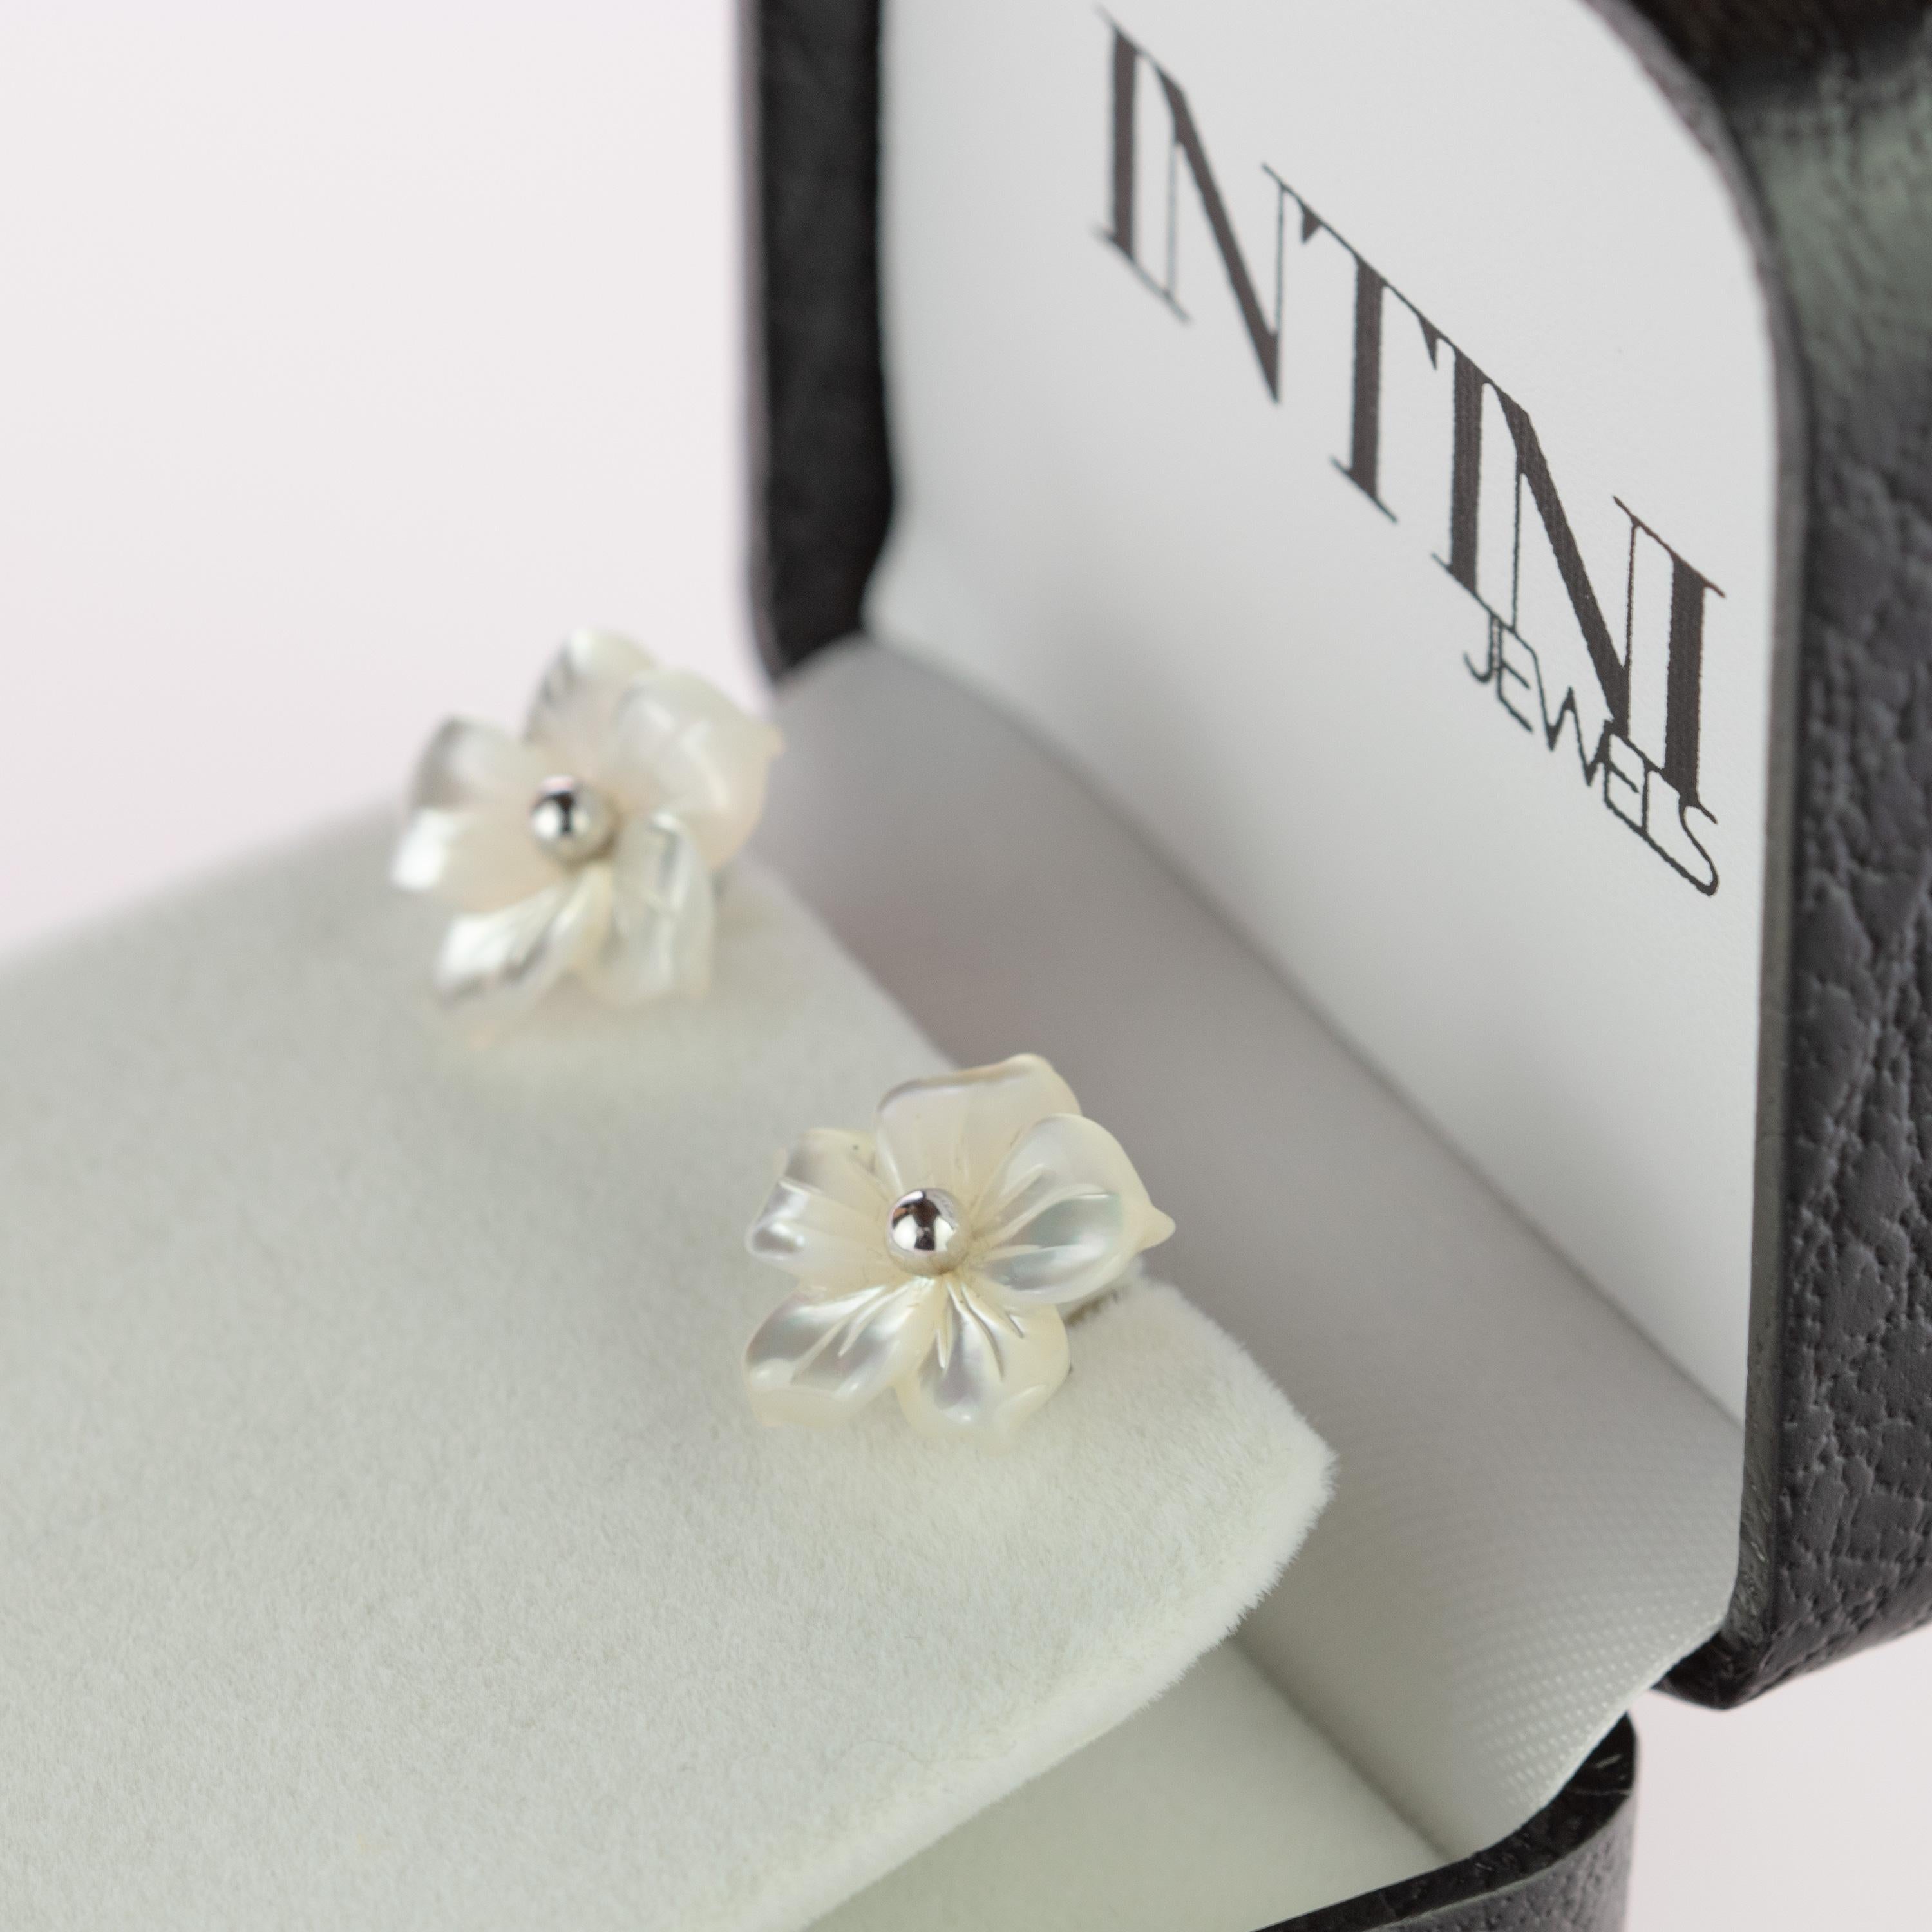 Astonishing and sweet white mother pearl flower stud earrings. Natural carved petals that evoke the italian handmade traditional jewelry work.
 
This delicate design shows the sweetness and innocence of the jewelry. It takes us to those first jewels